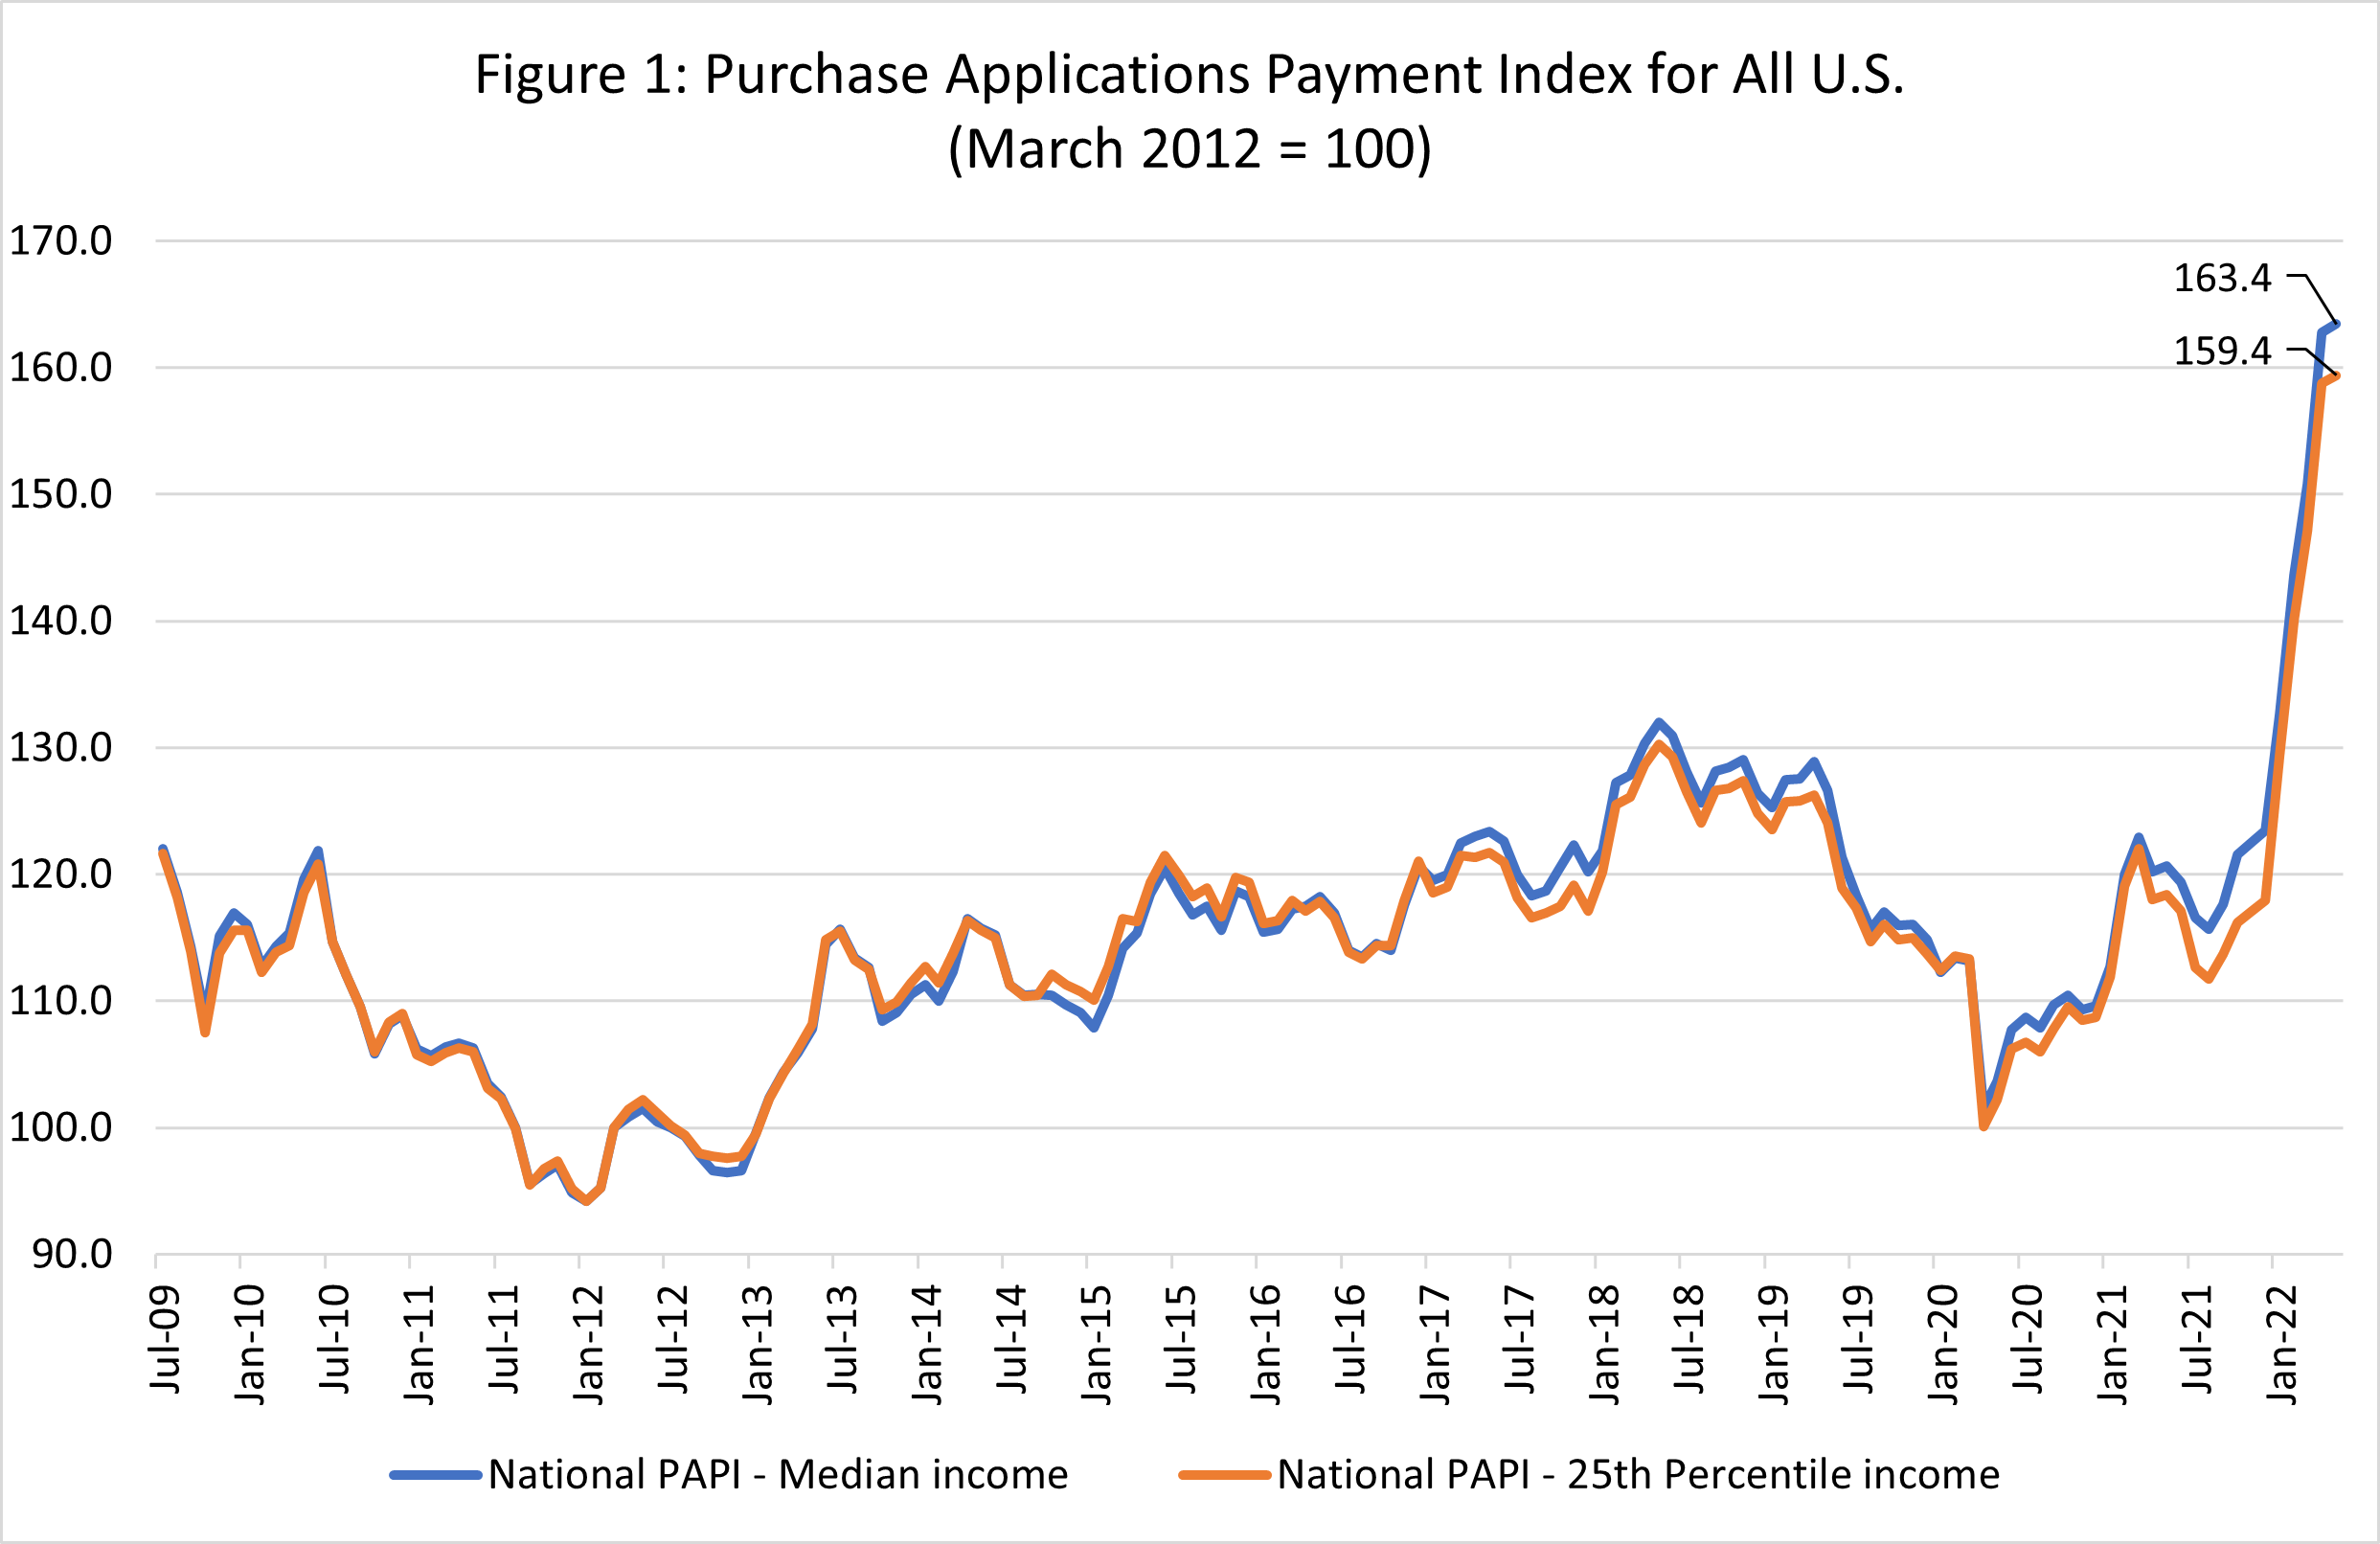 Figure 1: Purchase Applications Payment Index for All U.S. (March 2012 = 100)